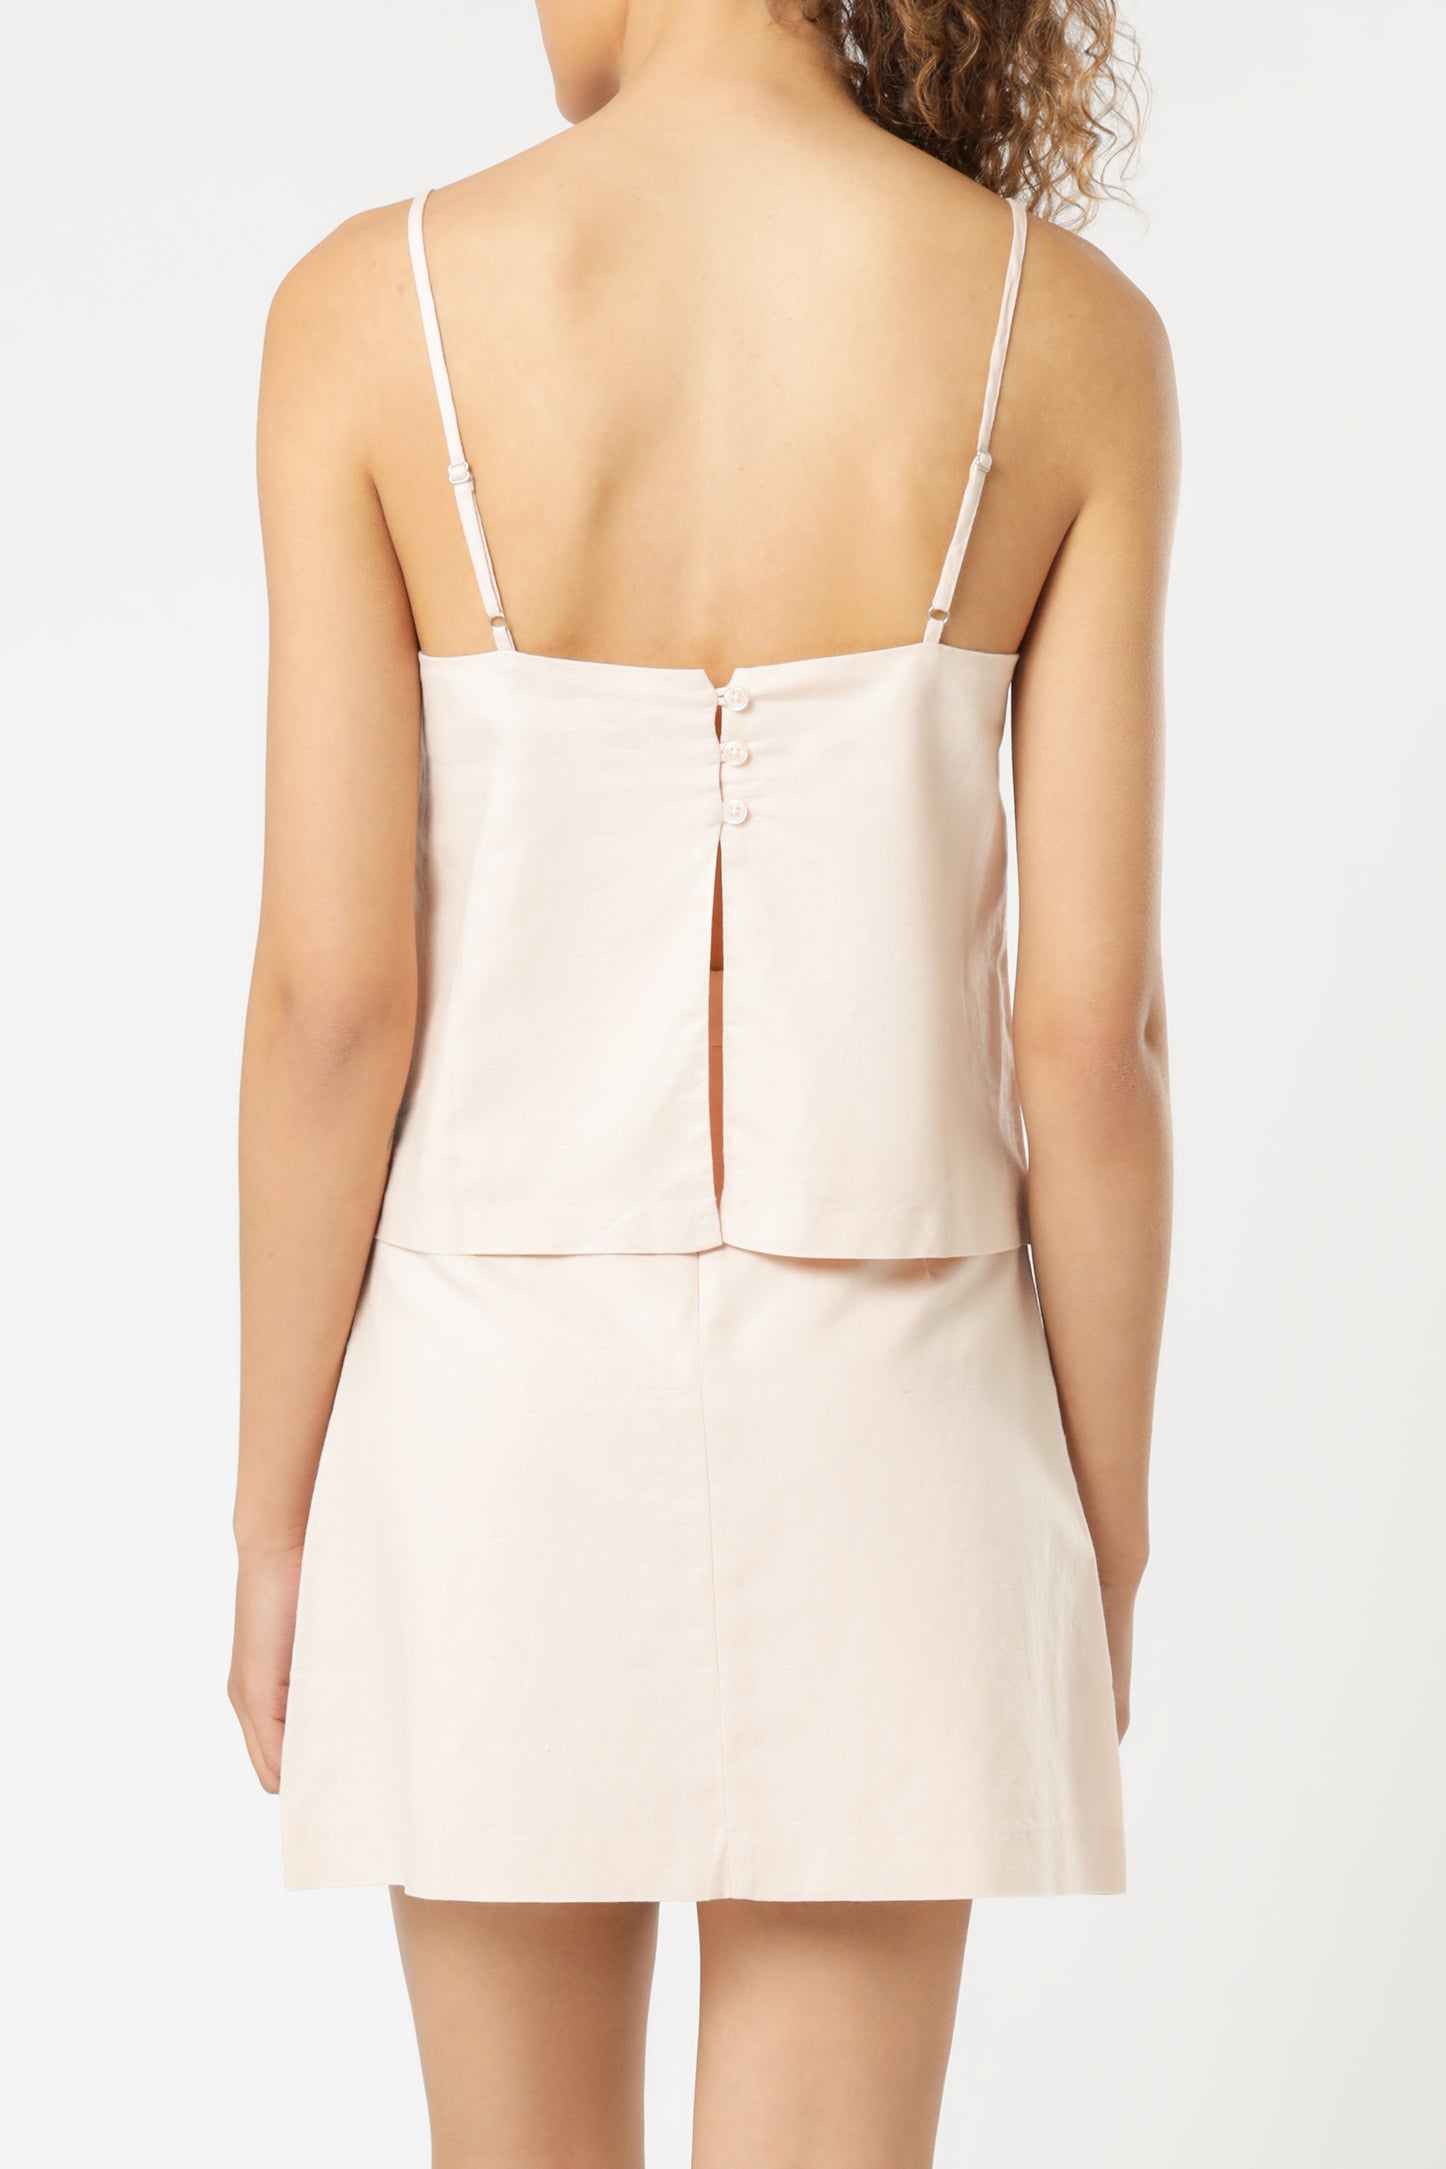 Nude Lucy miles linen cami nude top